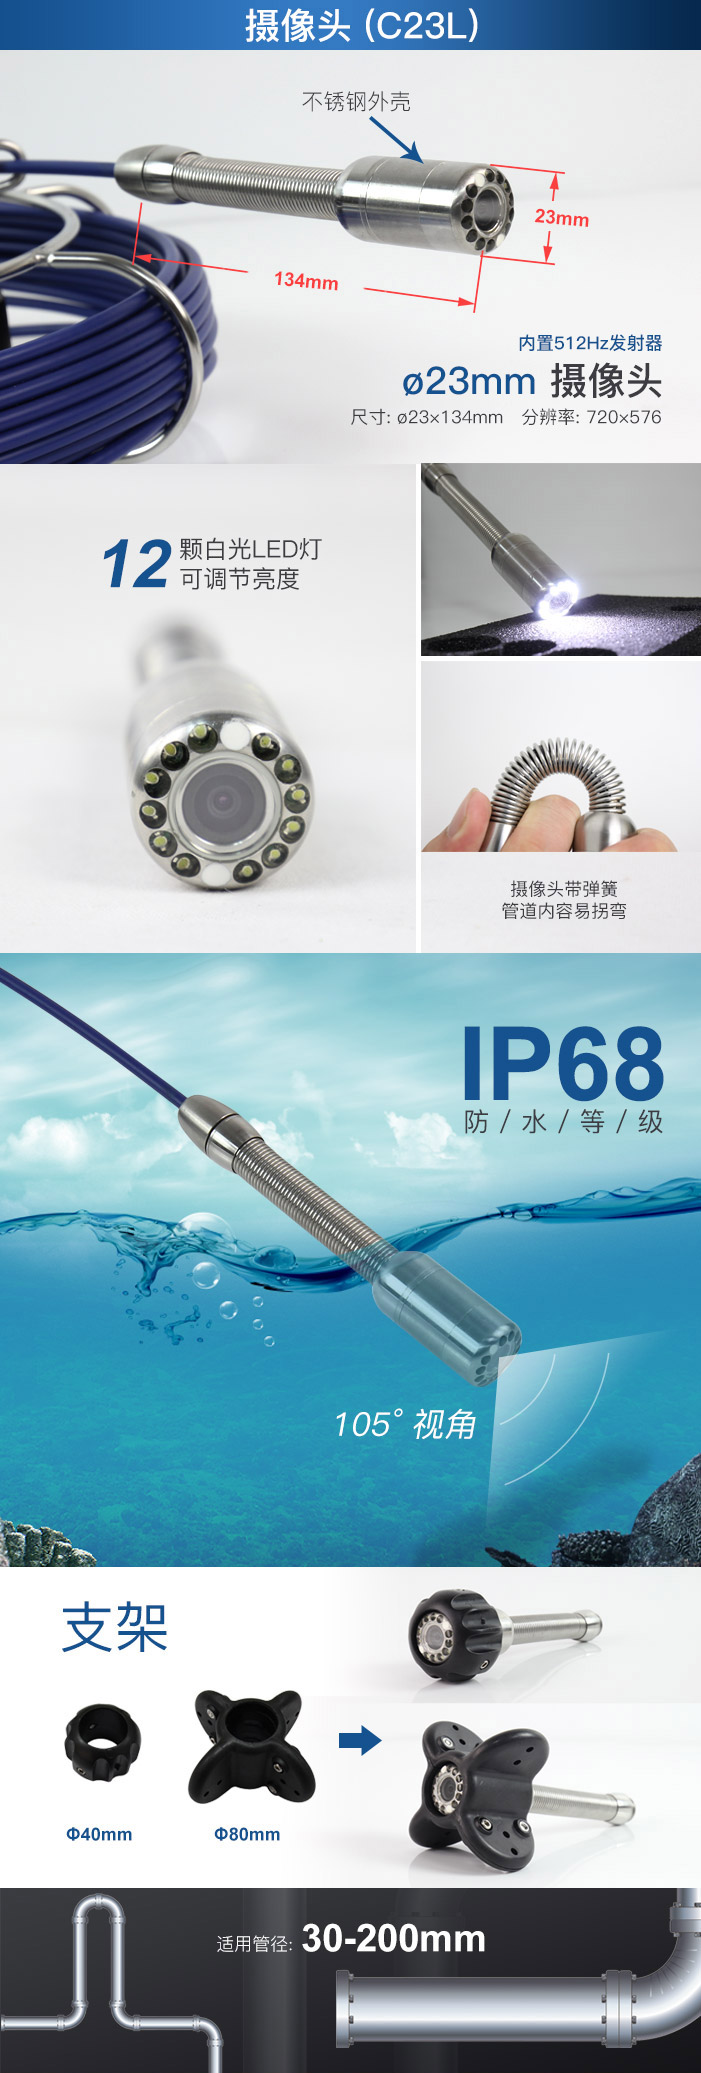 Water well inspection camera, intelligent electronic equipment, oil pipeline vessel inspection